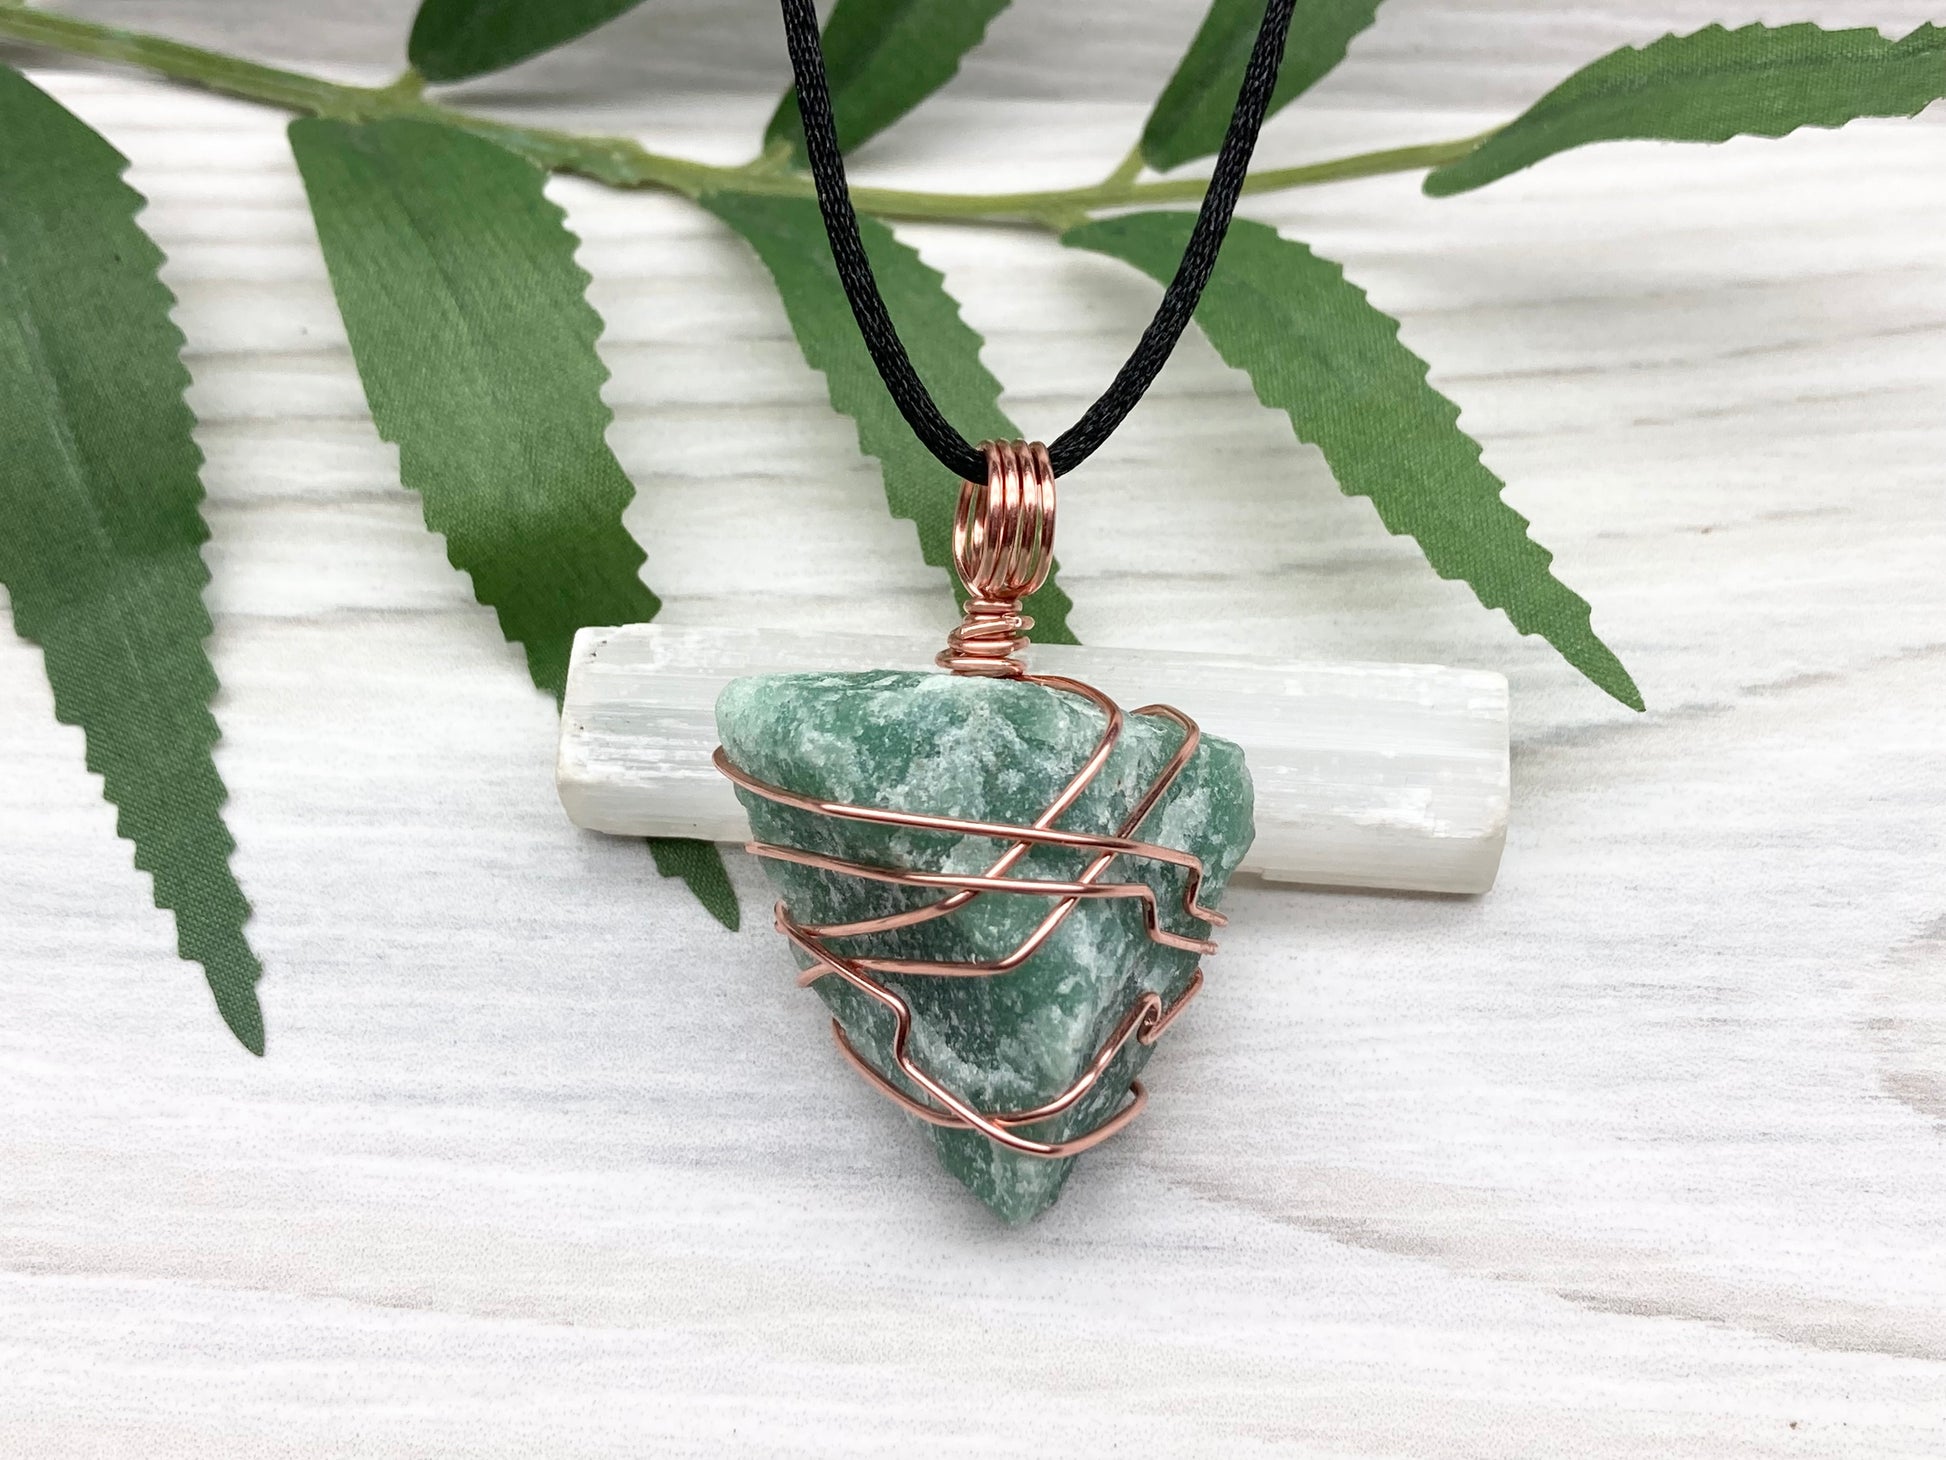 Green Quartz Necklace. Raw Green Crystal Wrapped With Copper Wire. Comes On A Black Chain. Handmade Metaphysical Jewelry For Him Or Her. 